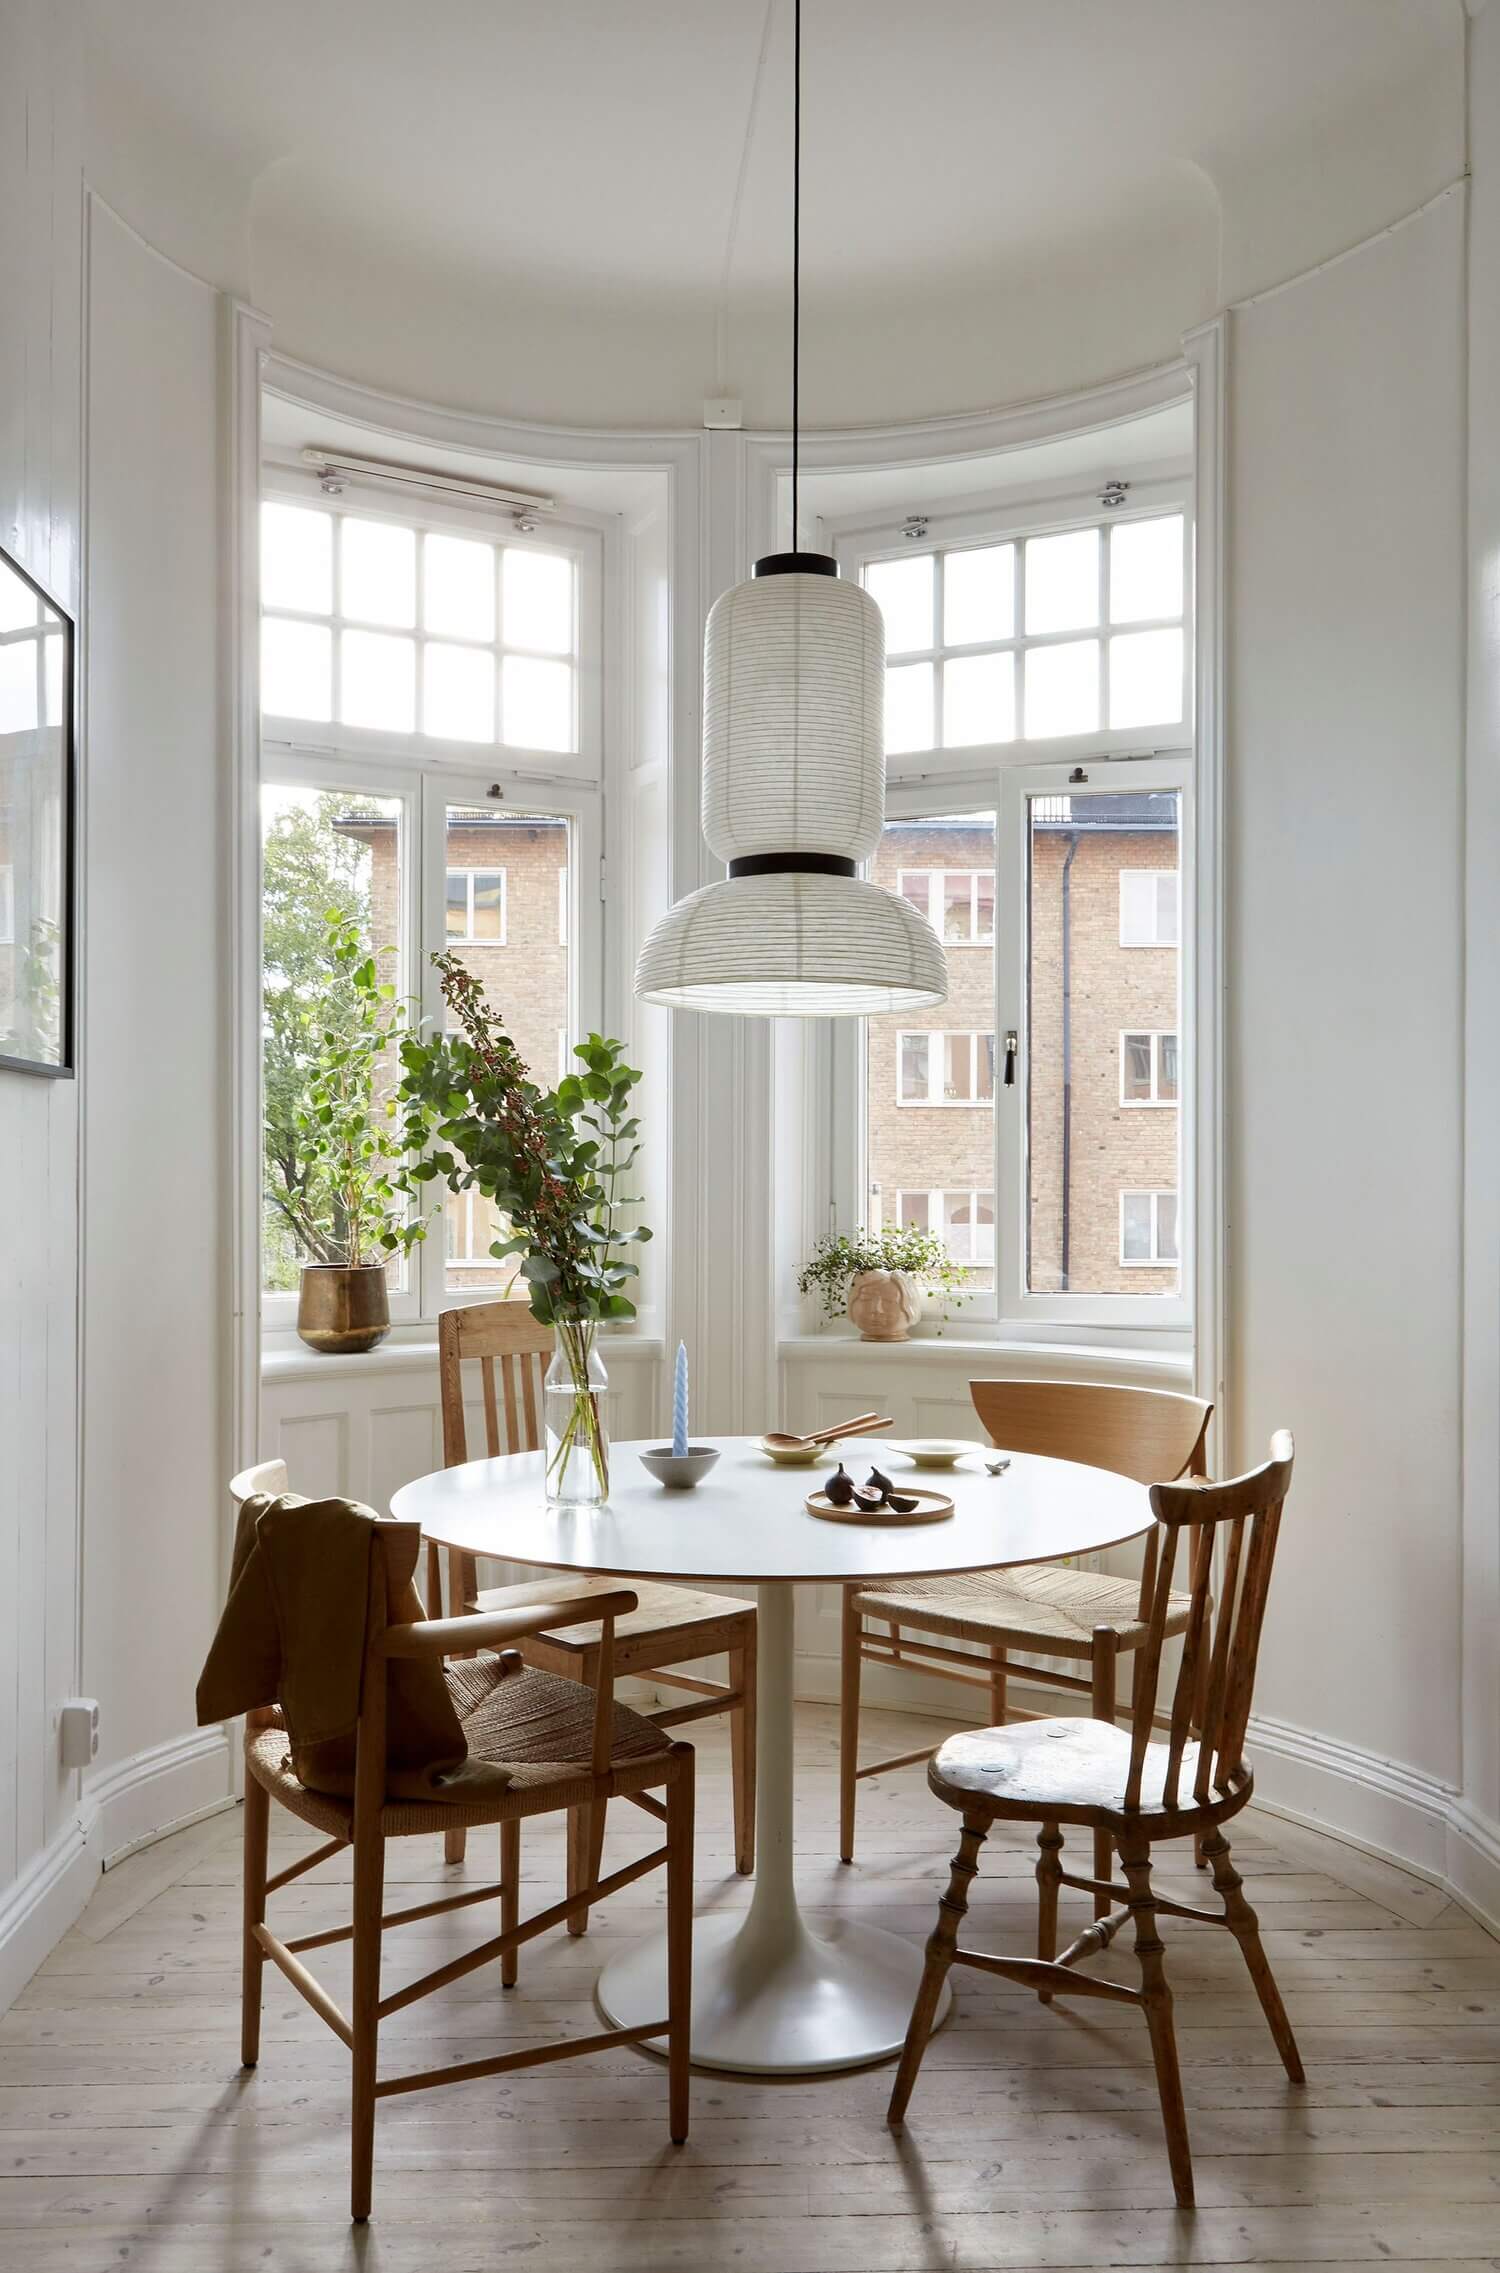 AScandinavianApartmentWithAMintGreenKitchen TheNordroom3 A Scandinavian Apartment With A Mint Green Kitchen